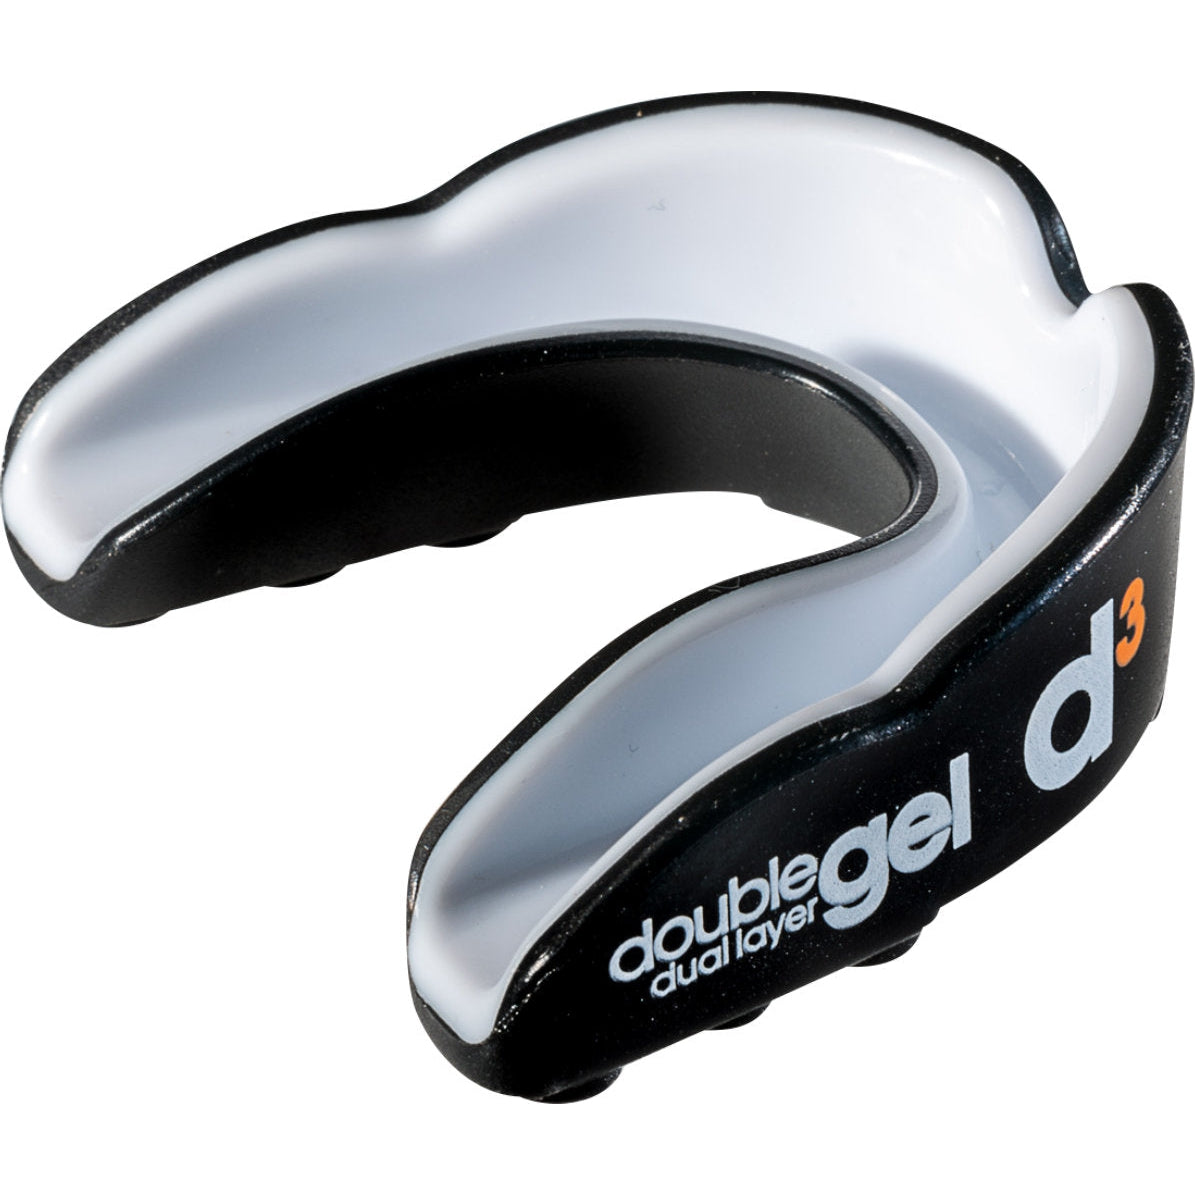 D3tape Mouthguard Black / White Youths